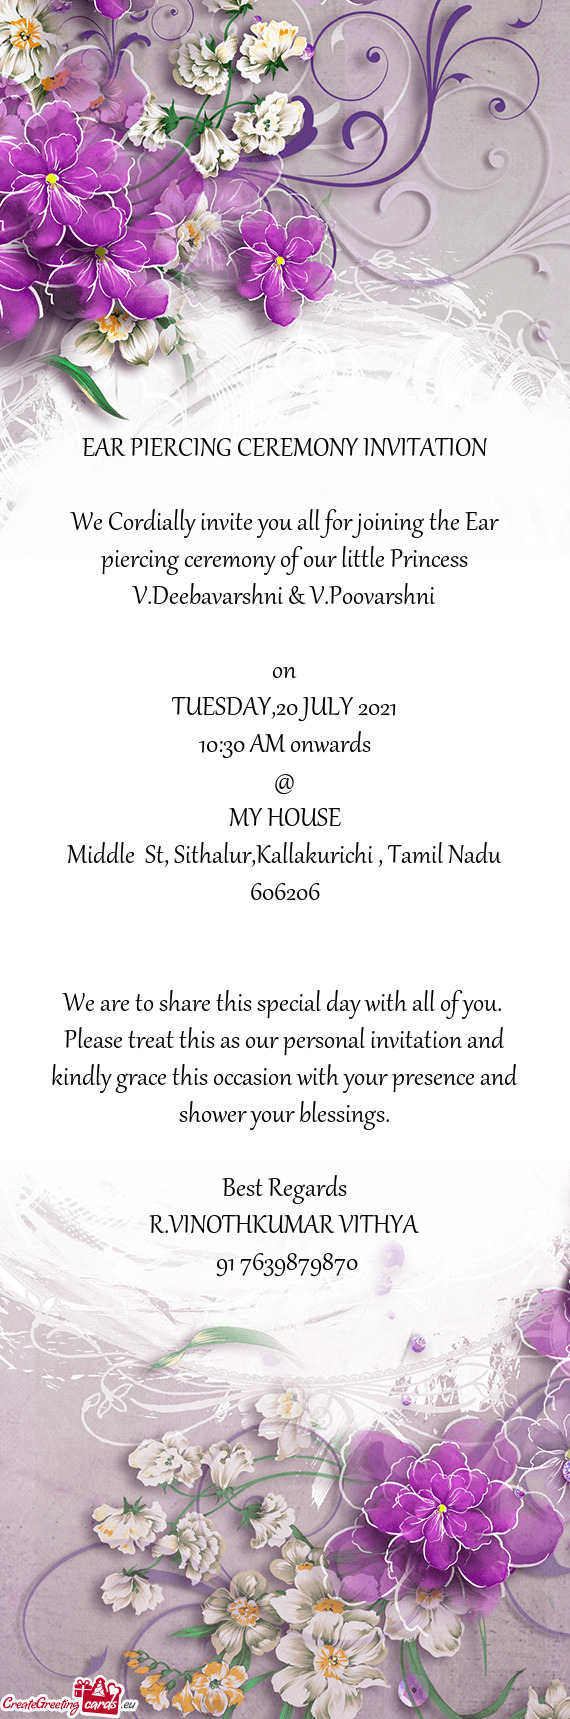 We Cordially invite you all for joining the Ear piercing ceremony of our little Princess V.Deebavars